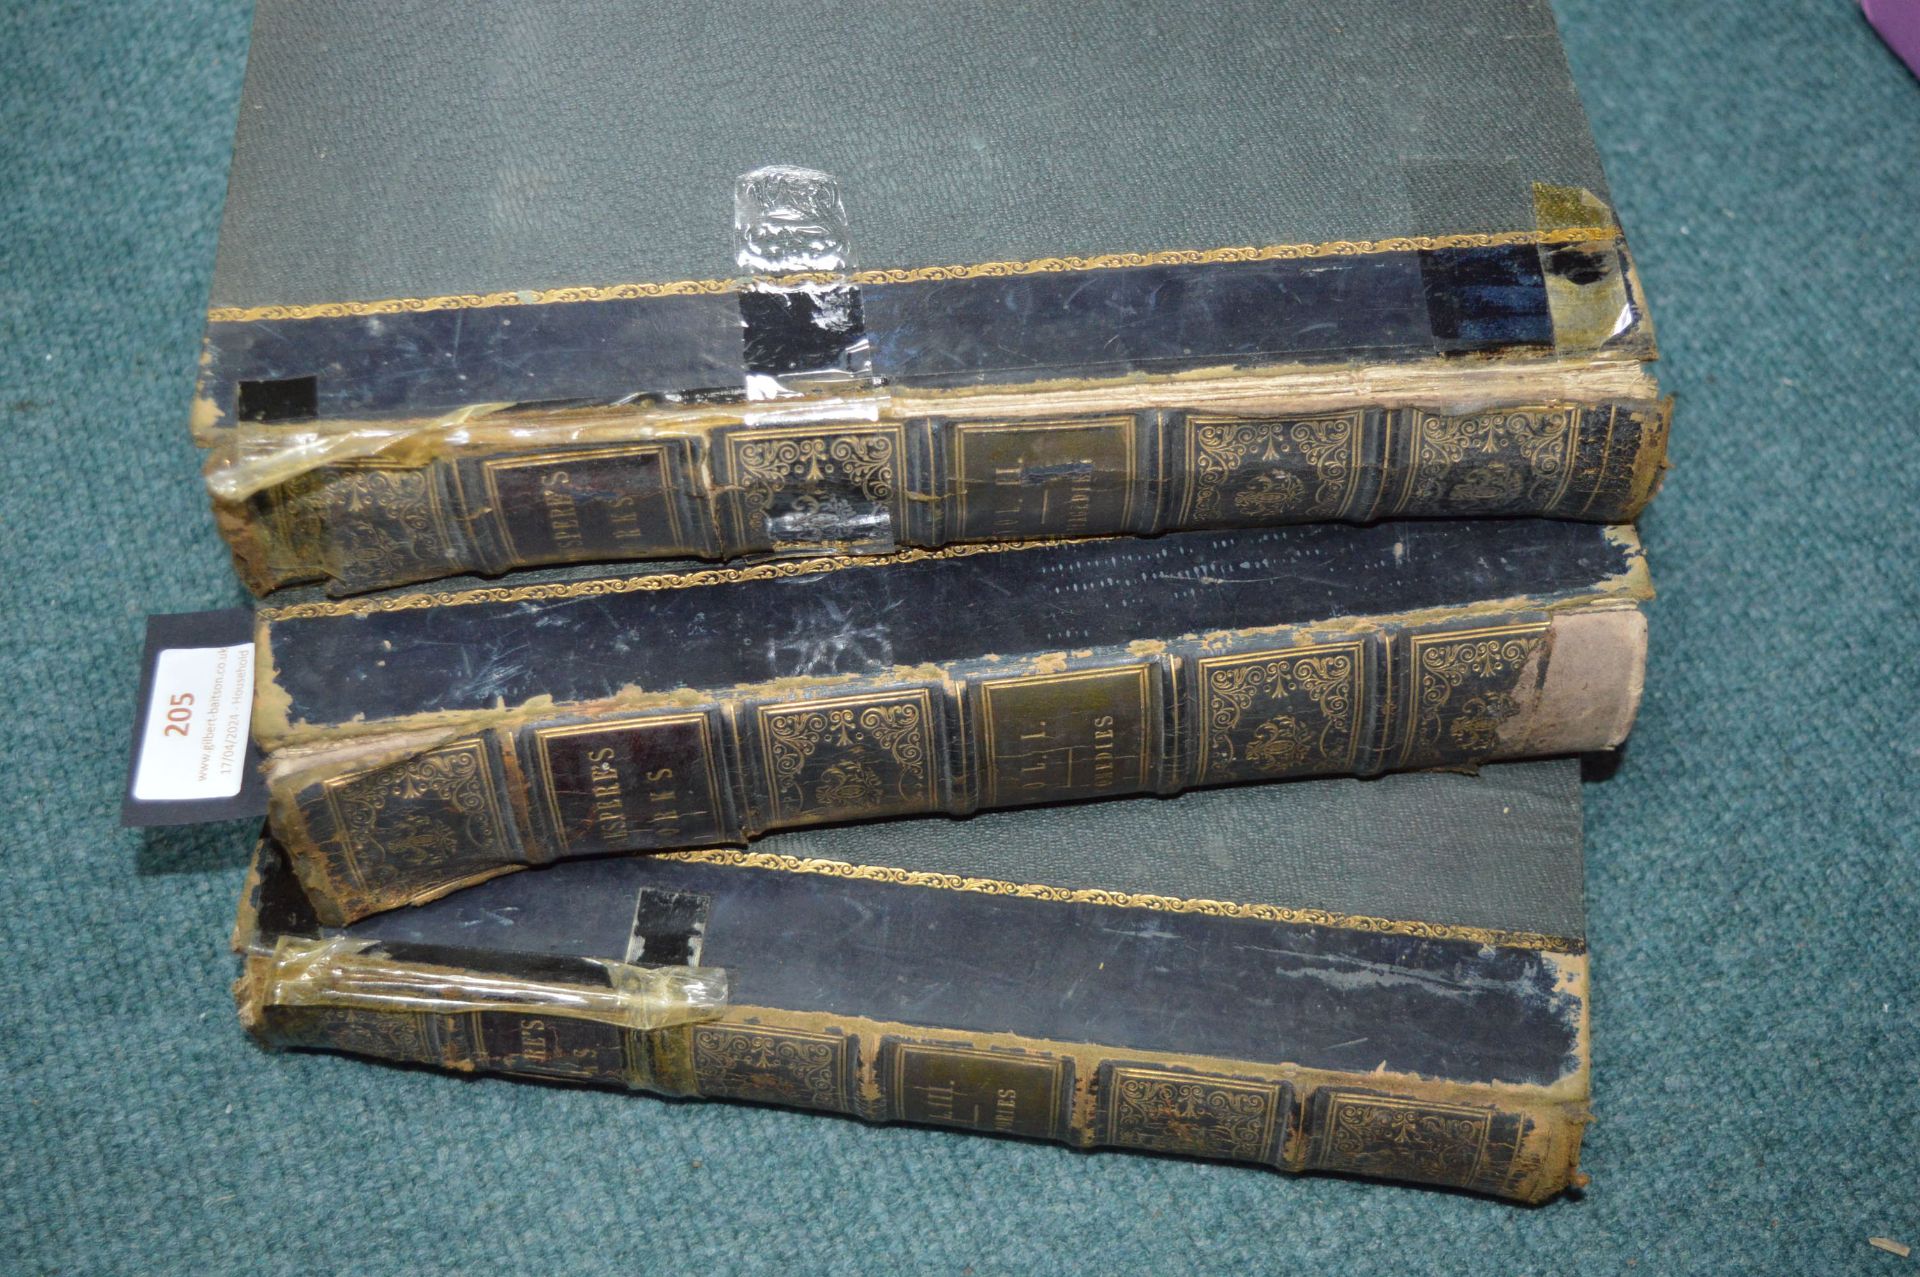 Three Volumes of the Works of Shakespeare publishe - Image 2 of 2